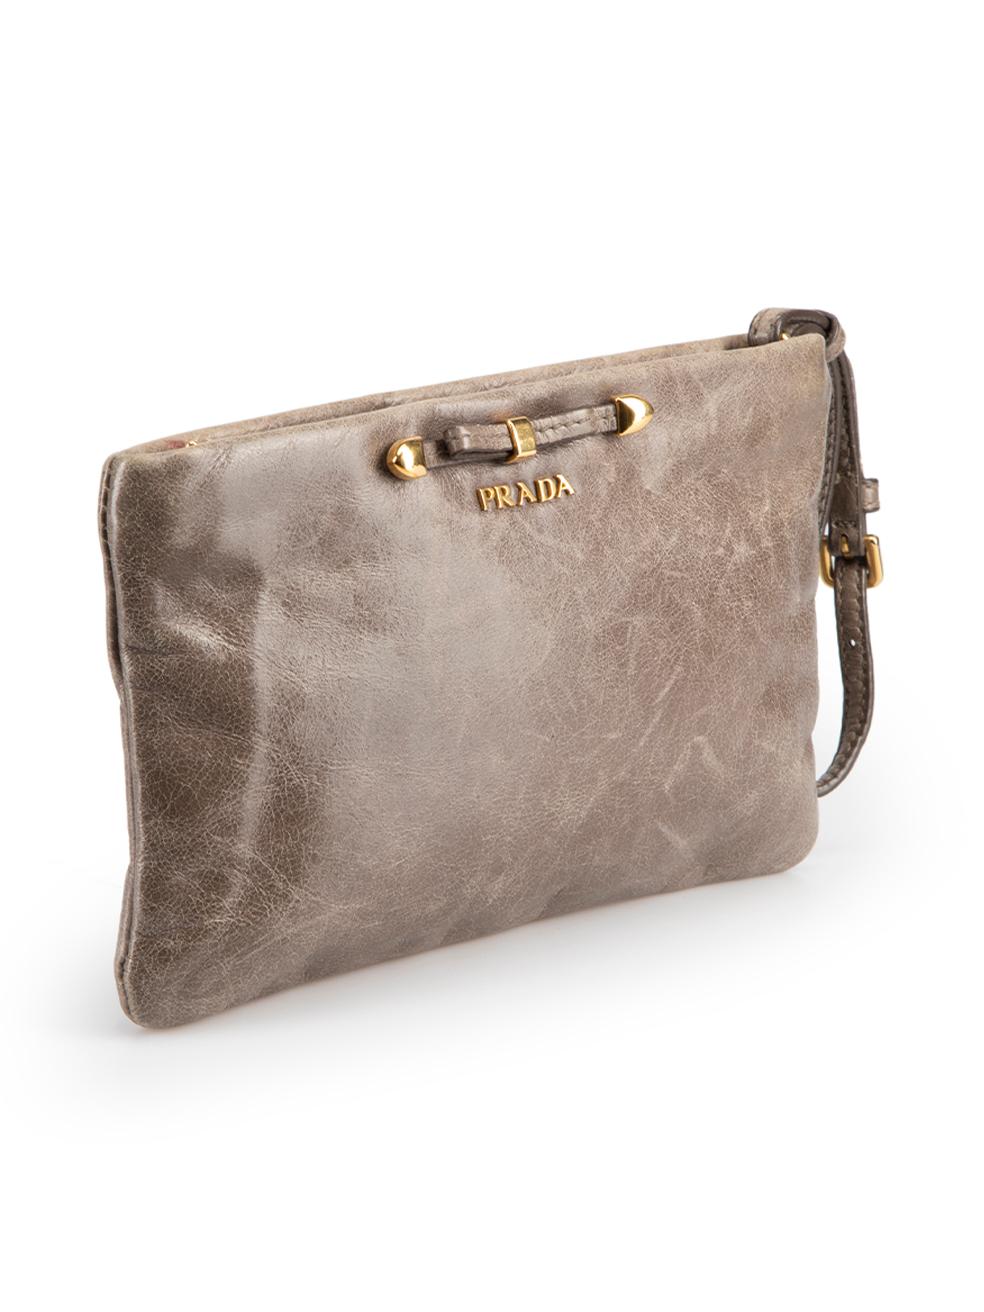 CONDITION is Very good. Minimal wear to clutch is evident. Minimal wear to the front and back with scuff marks on this used Prada designer resale item.



Details


Brown

Leather

Mini clutch

1x Zipped main compartment

Gold tone hardware

Gold